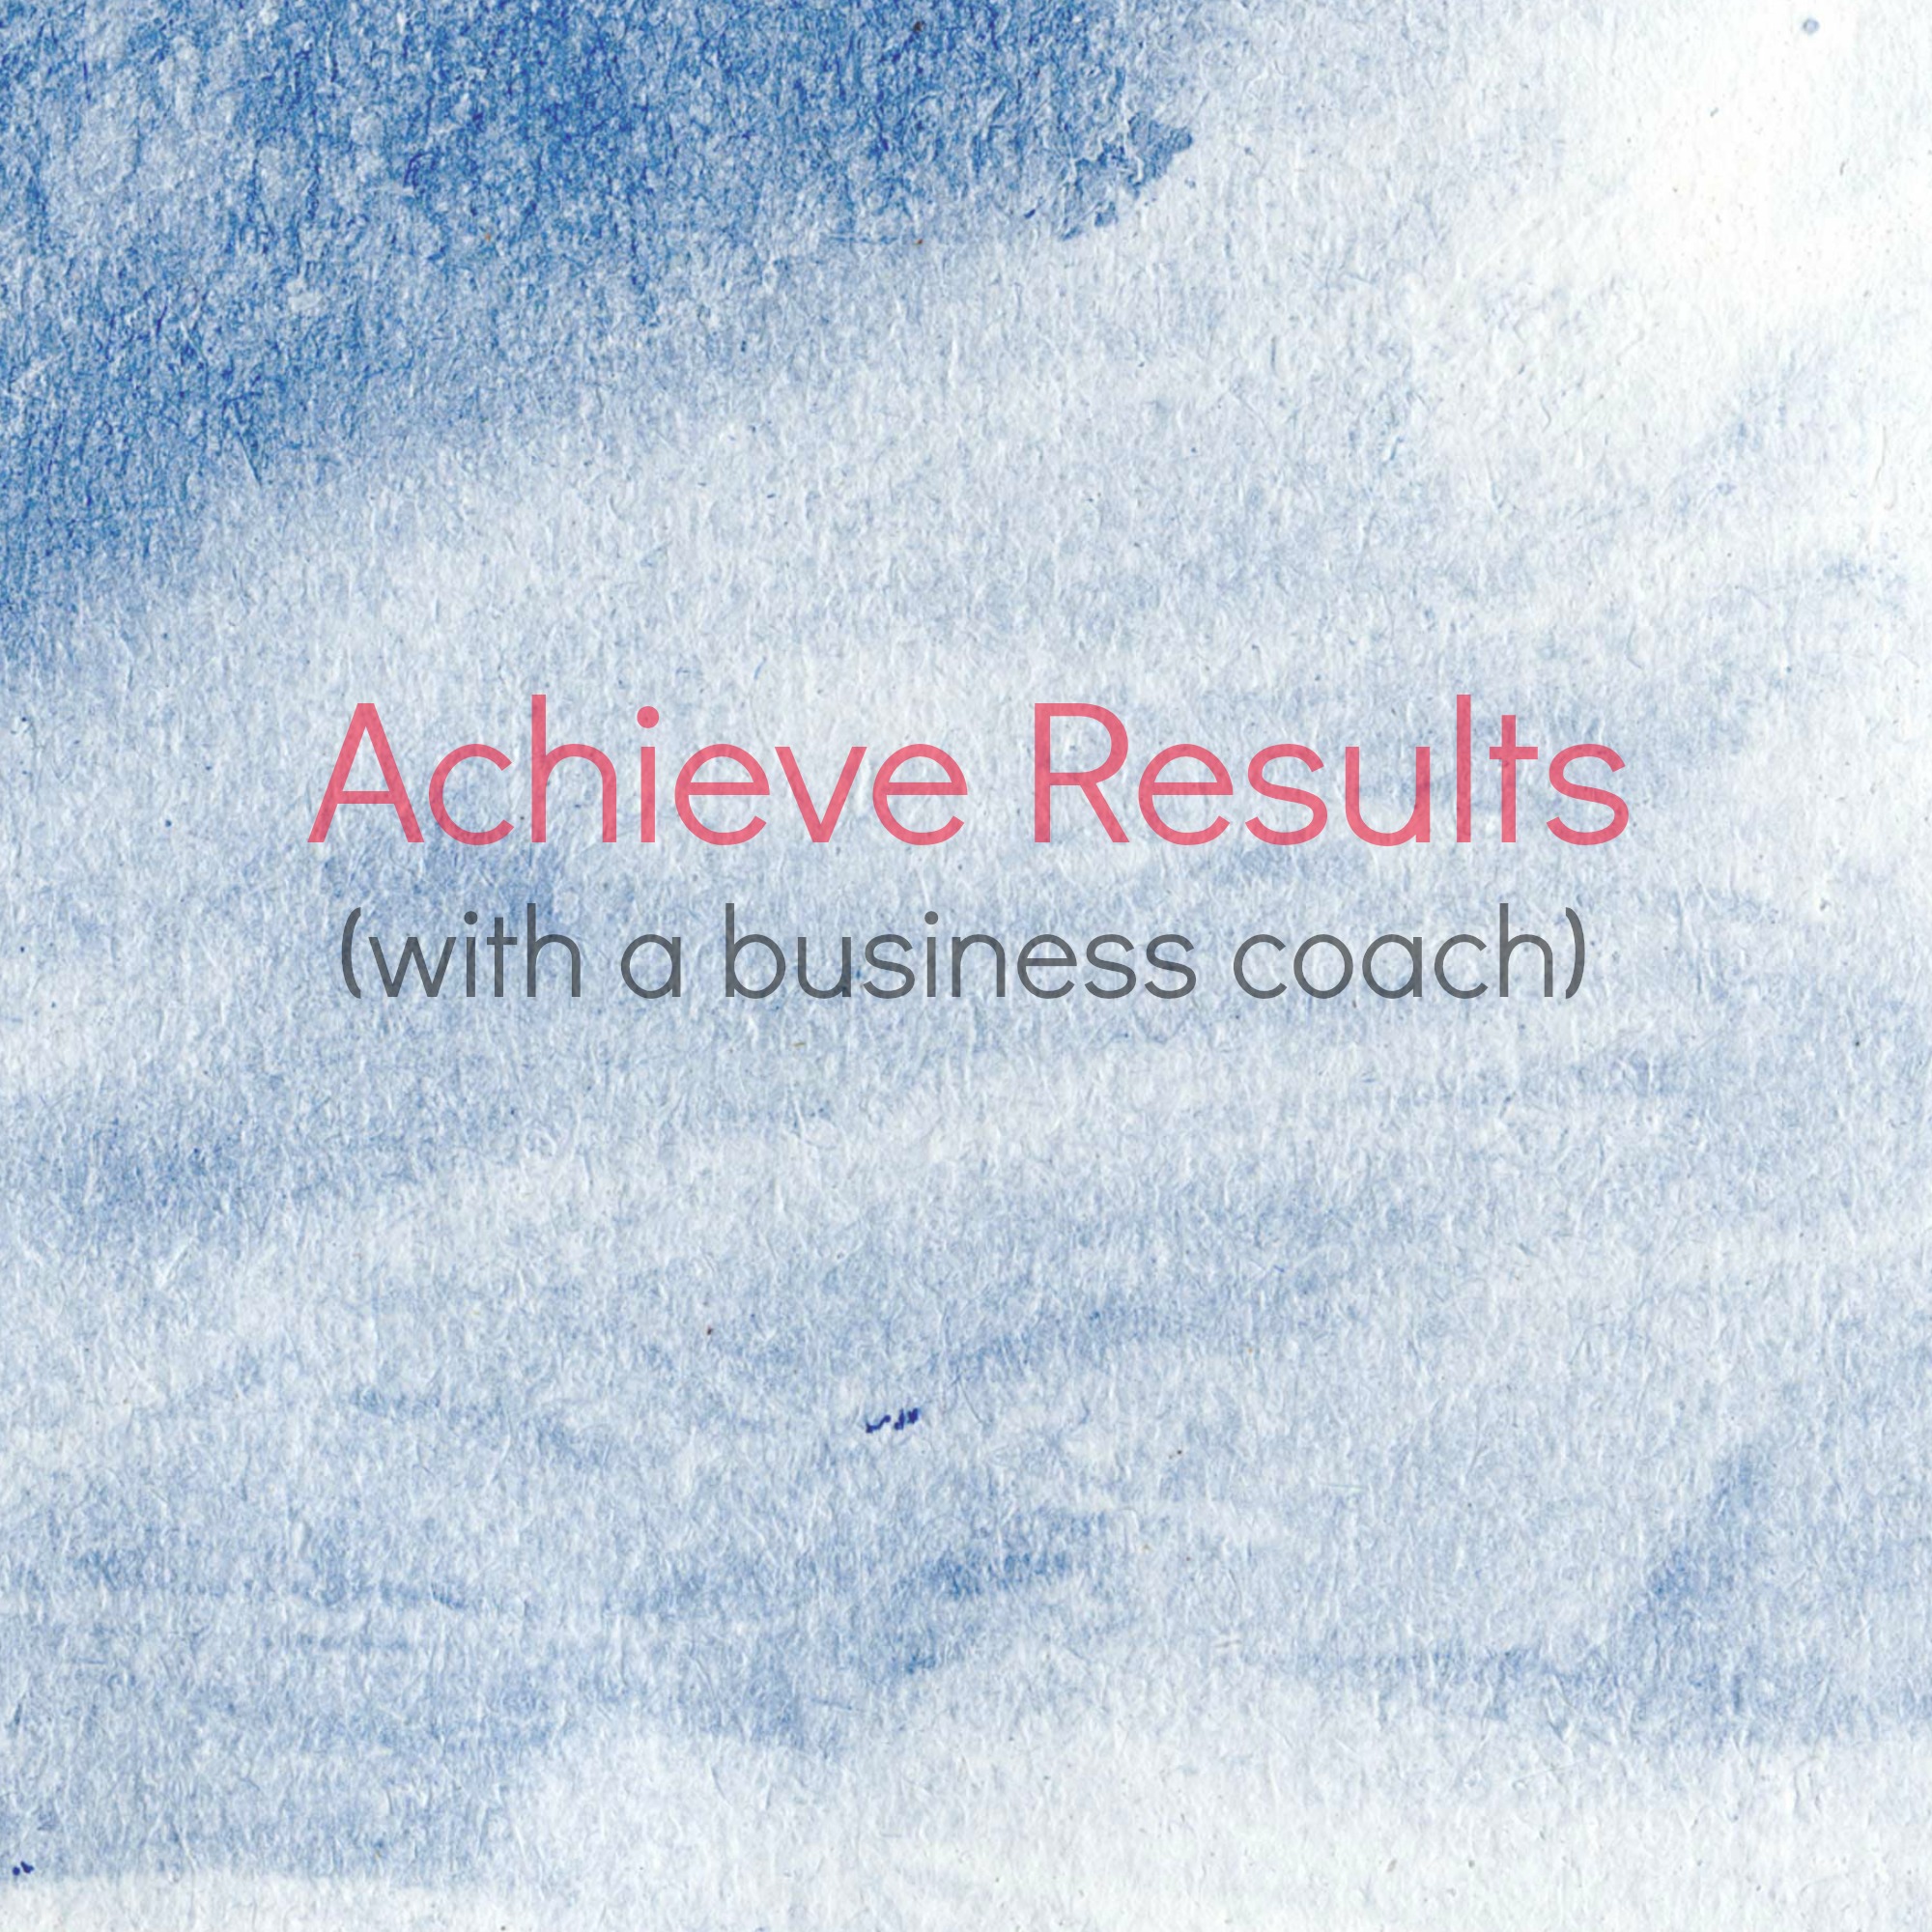 Why should you work with a business coach? 3 Ways to Achieve Results